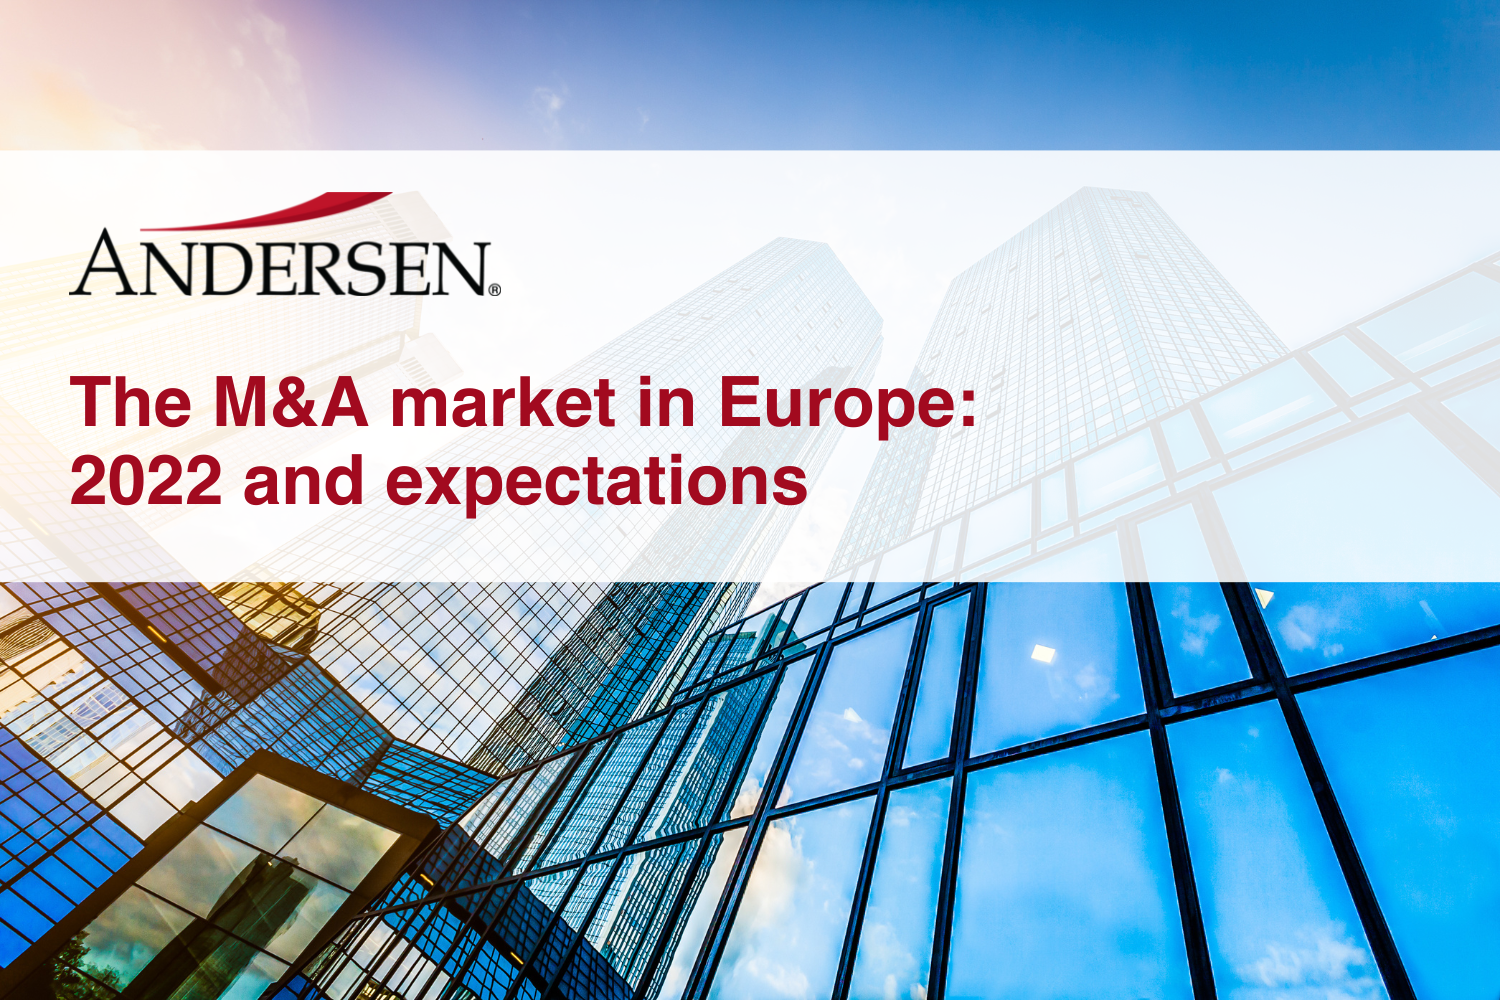 The M&A market in Europe: 2022 and expectations